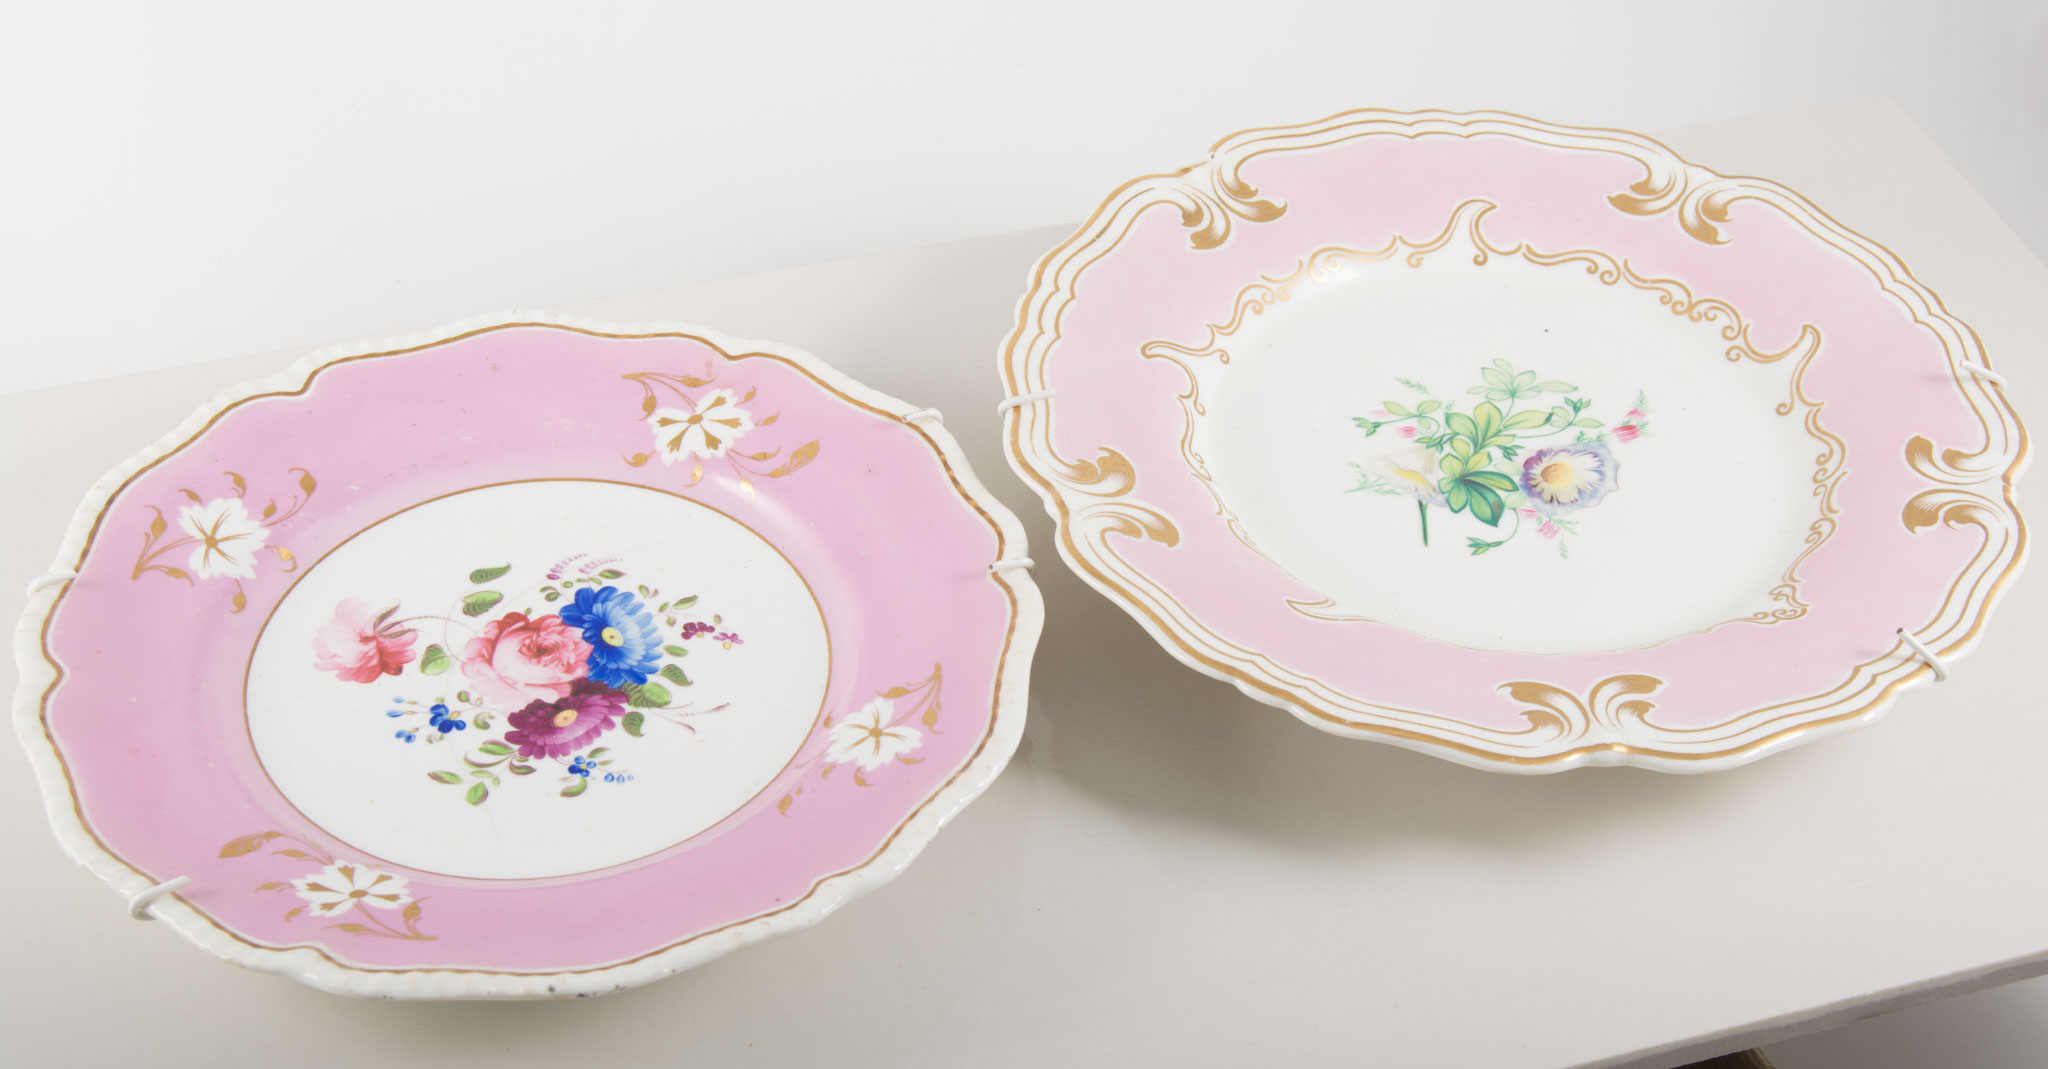 Collection of decorative hand painted plates, various floral designs, pink and green borders.